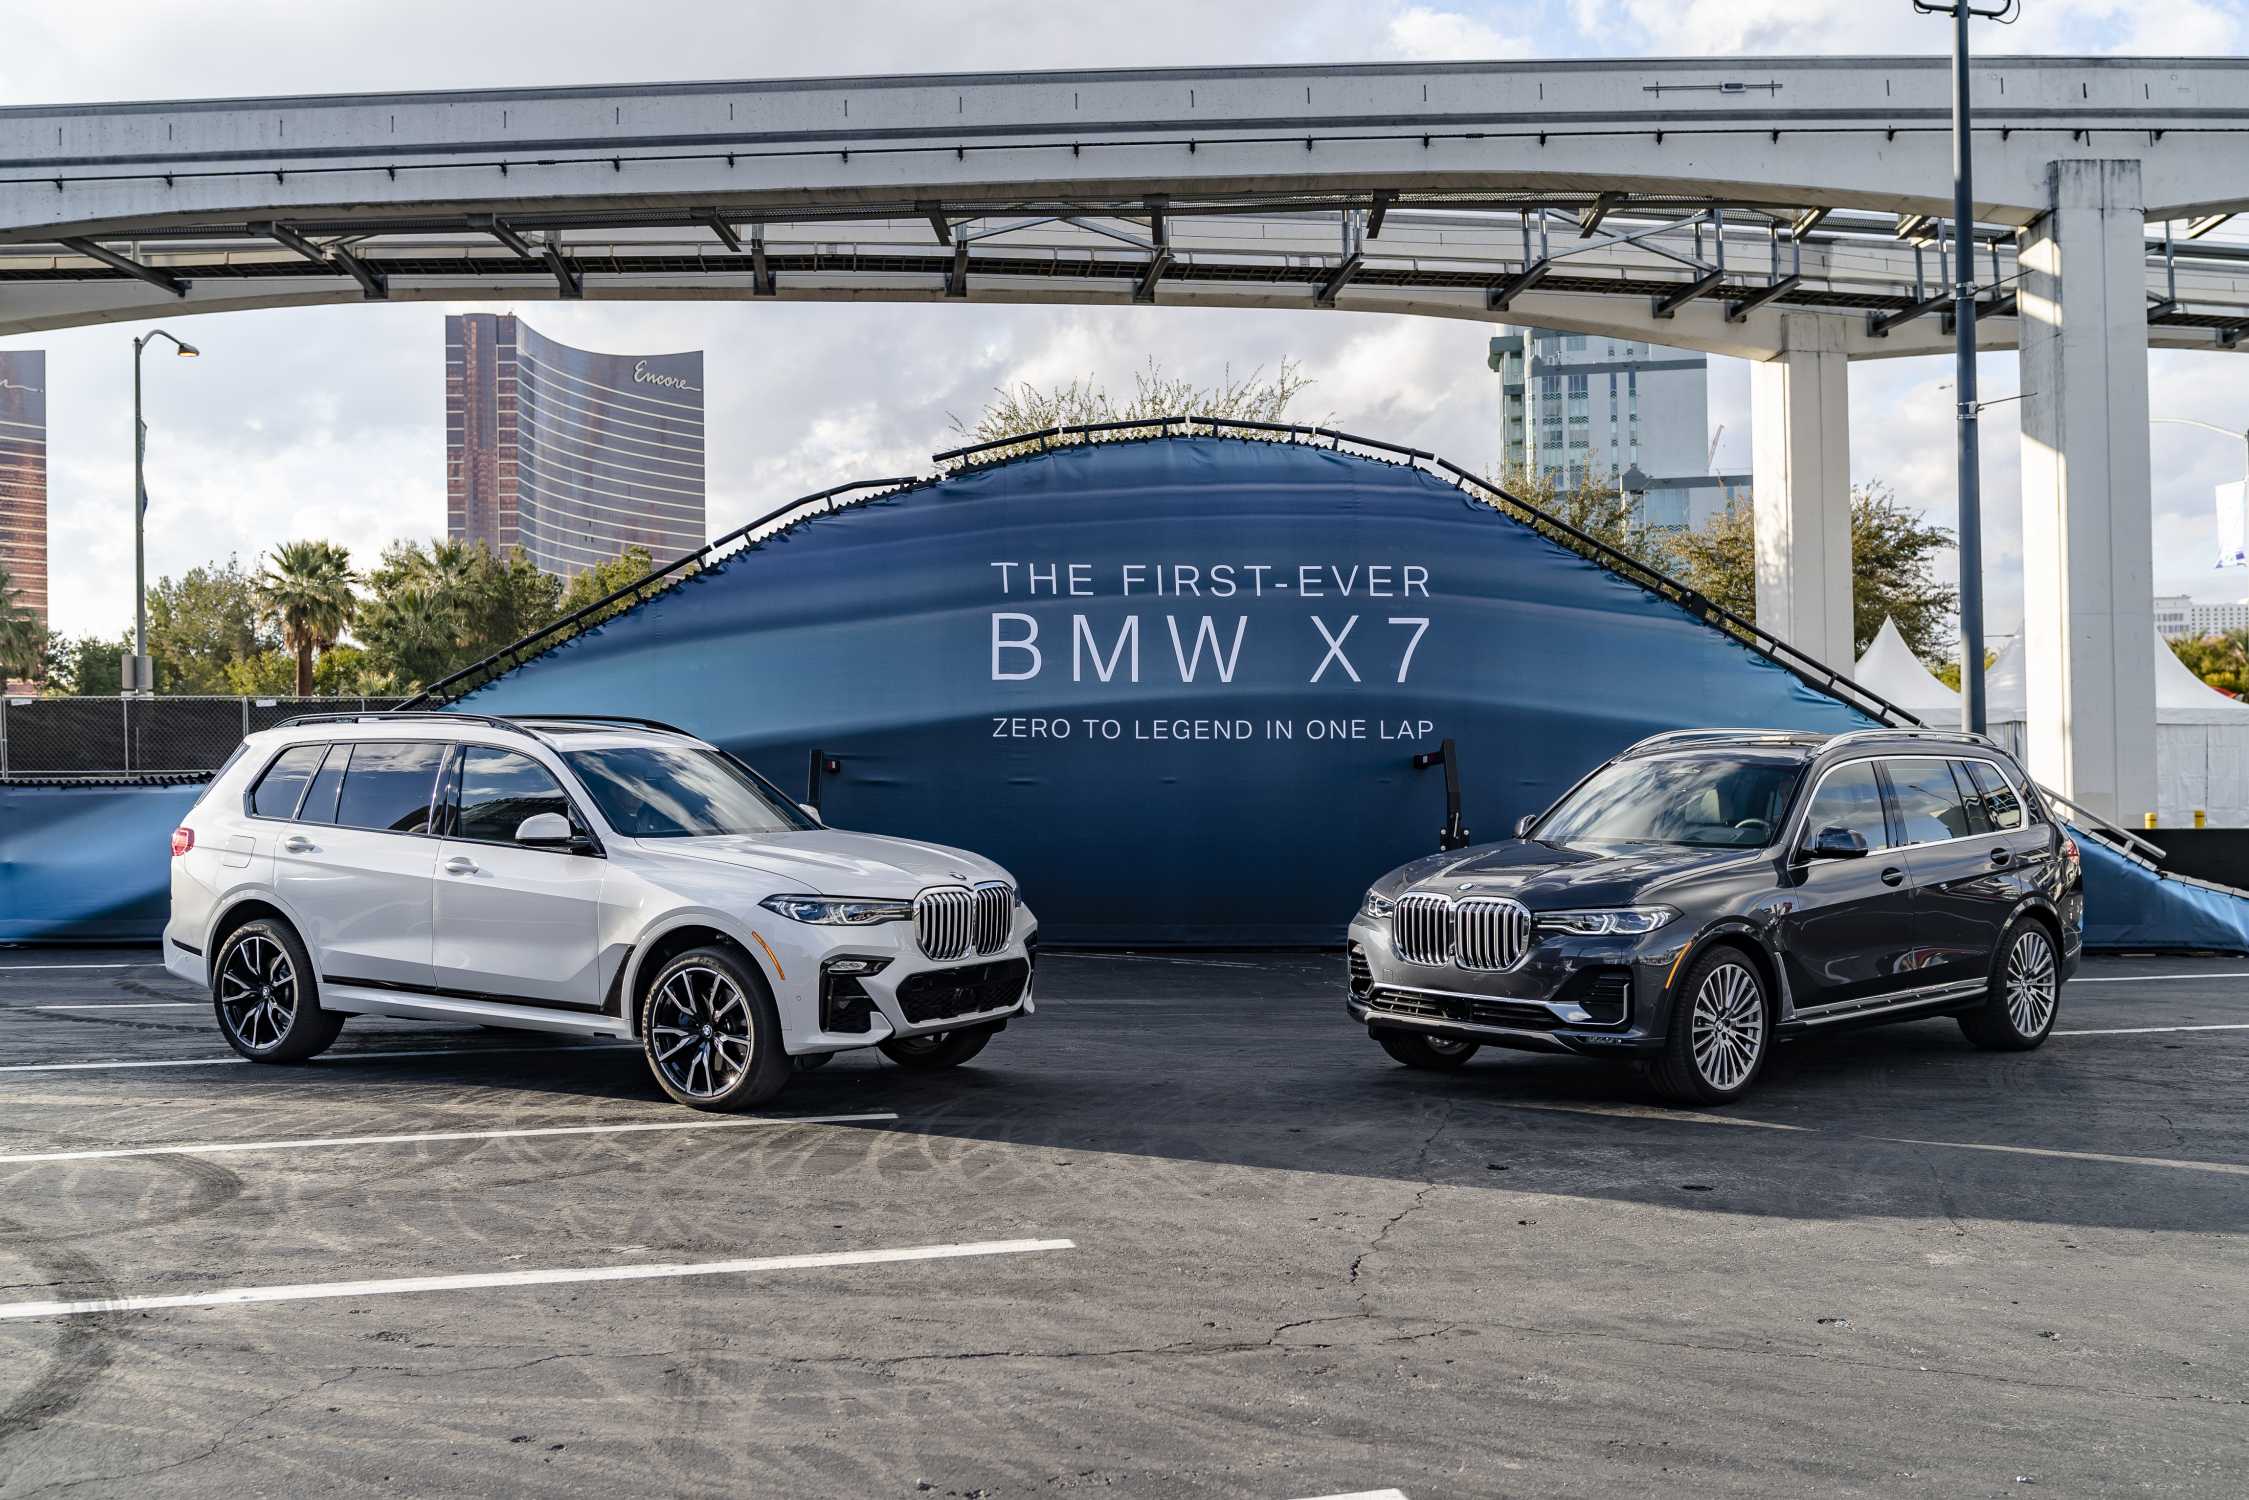 BMW Group @ CES 2019 – BMW X7 off-road experience. (01/2019)